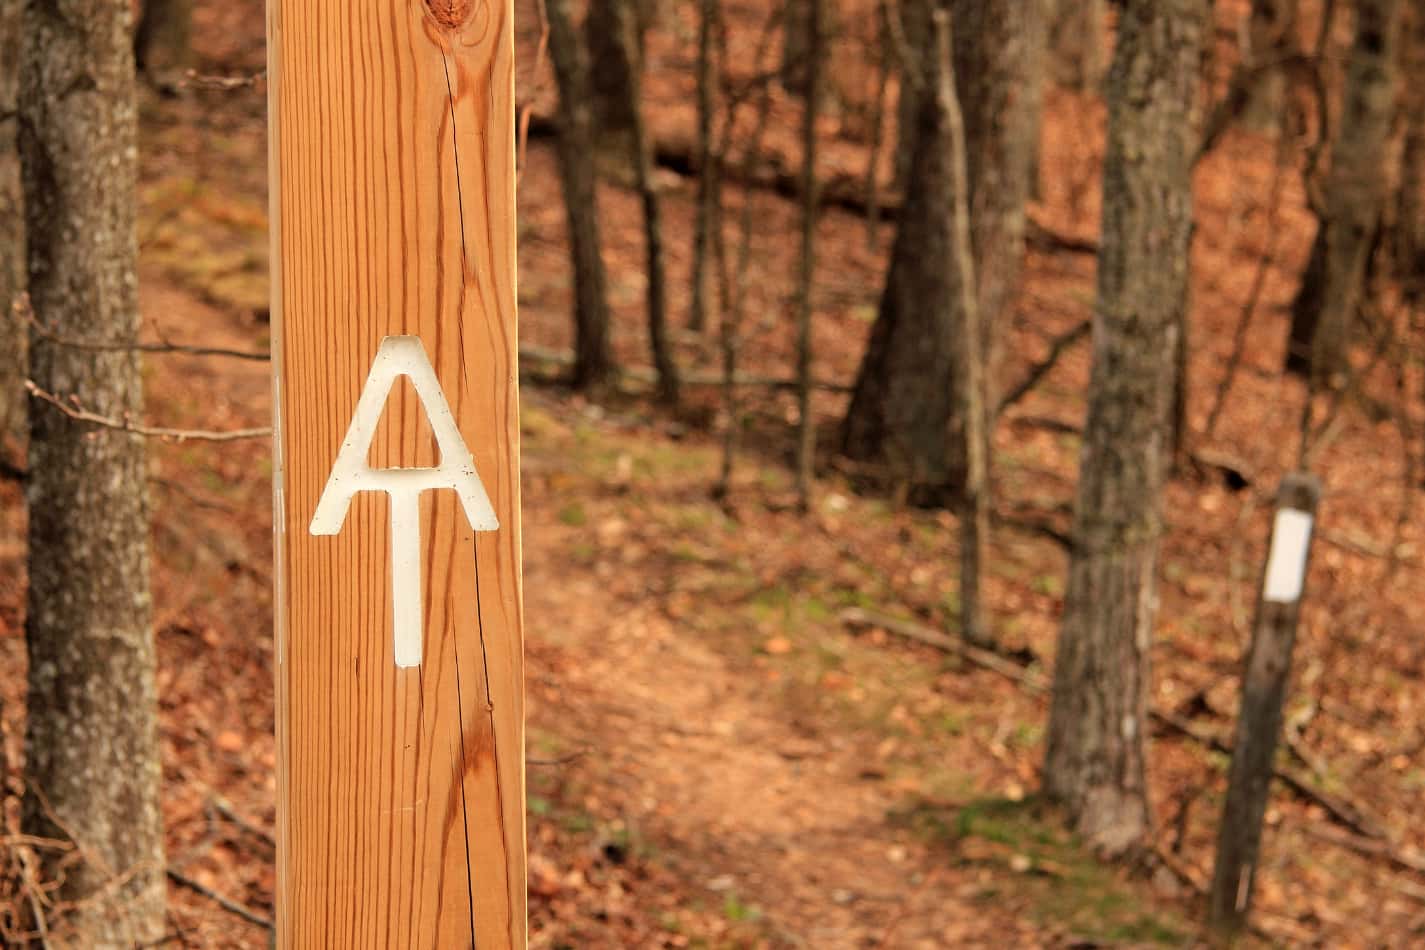 How long would it take to hike the appalachian trail